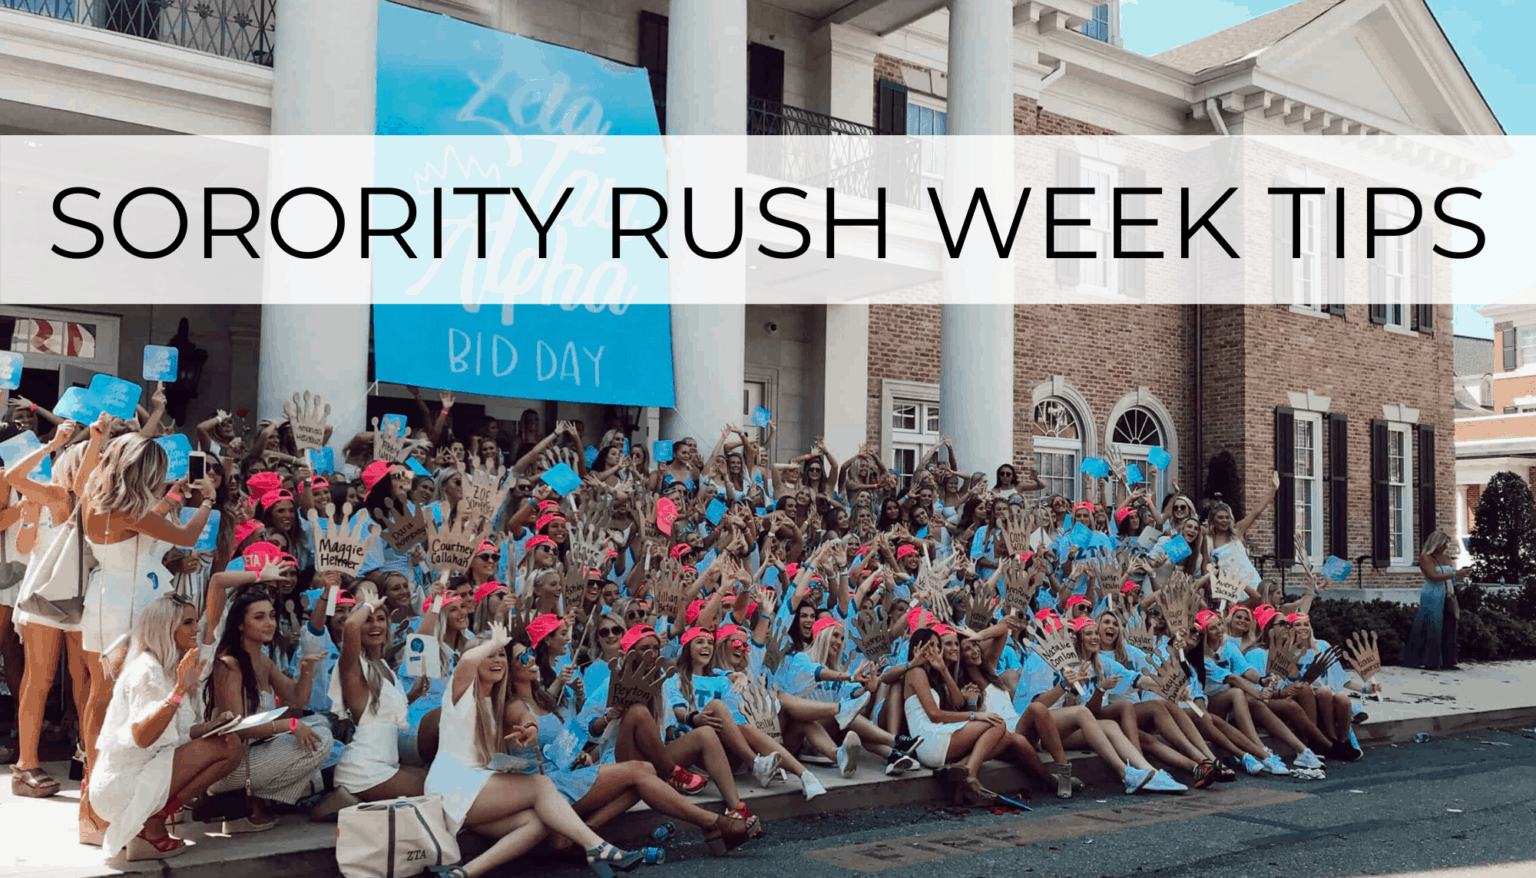 15 Sorority Rush Week Tips You Need To Know Before Recruitment